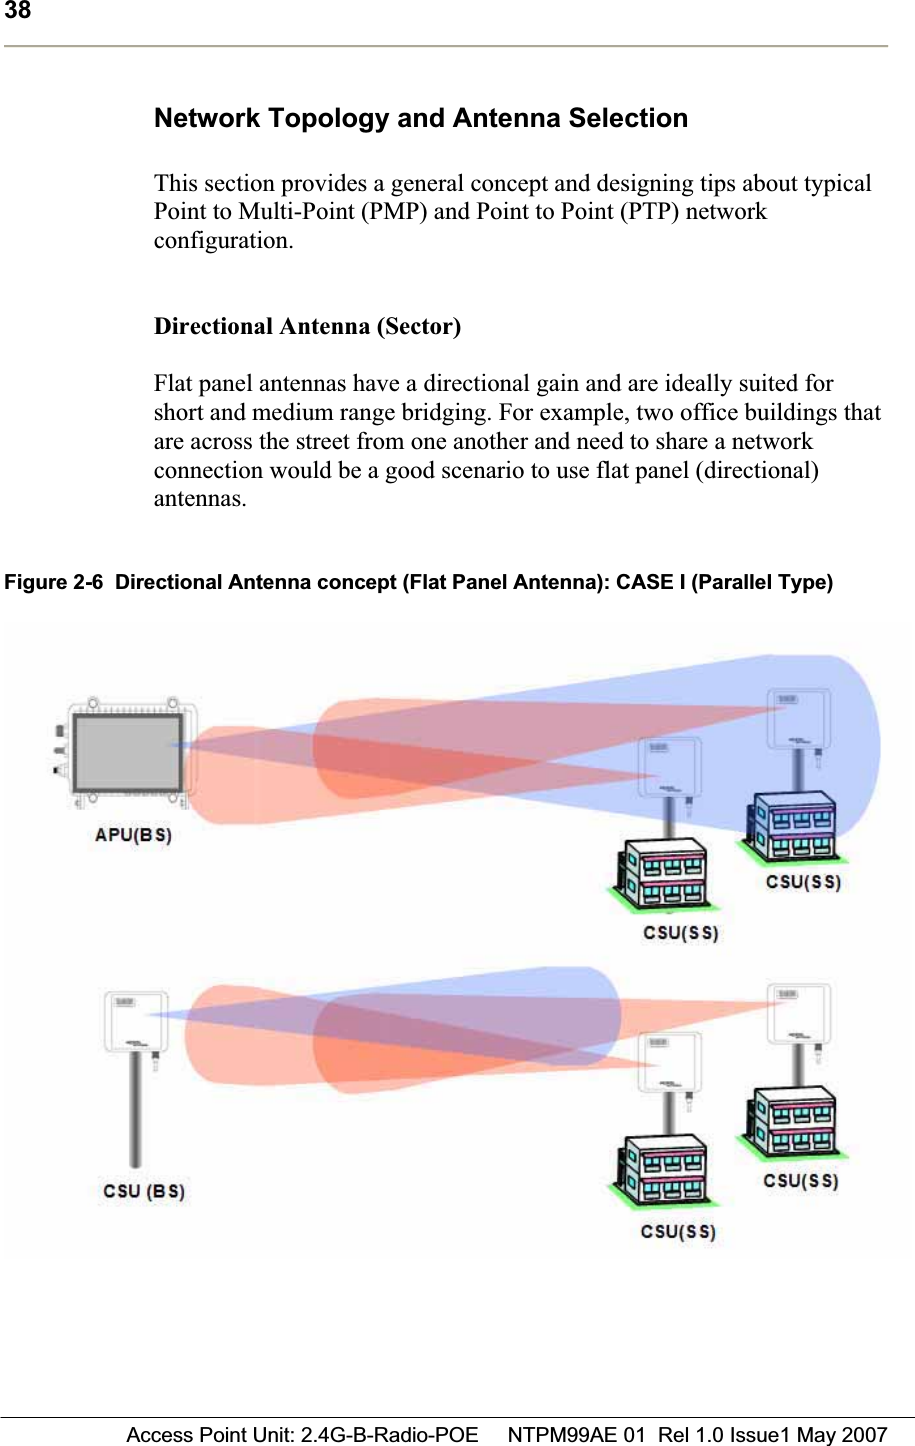 38 Access Point Unit: 2.4G-B-Radio-POE     NTPM99AE 01  Rel 1.0 Issue1 May 2007Network Topology and Antenna Selection  This section provides a general concept and designing tips about typical Point to Multi-Point (PMP) and Point to Point (PTP) network configuration.Directional Antenna (Sector) Flat panel antennas have a directional gain and are ideally suited for short and medium range bridging. For example, two office buildings that are across the street from one another and need to share a network connection would be a good scenario to use flat panel (directional) antennas.Figure 2-6  Directional Antenna concept (Flat Panel Antenna): CASE I (Parallel Type) 